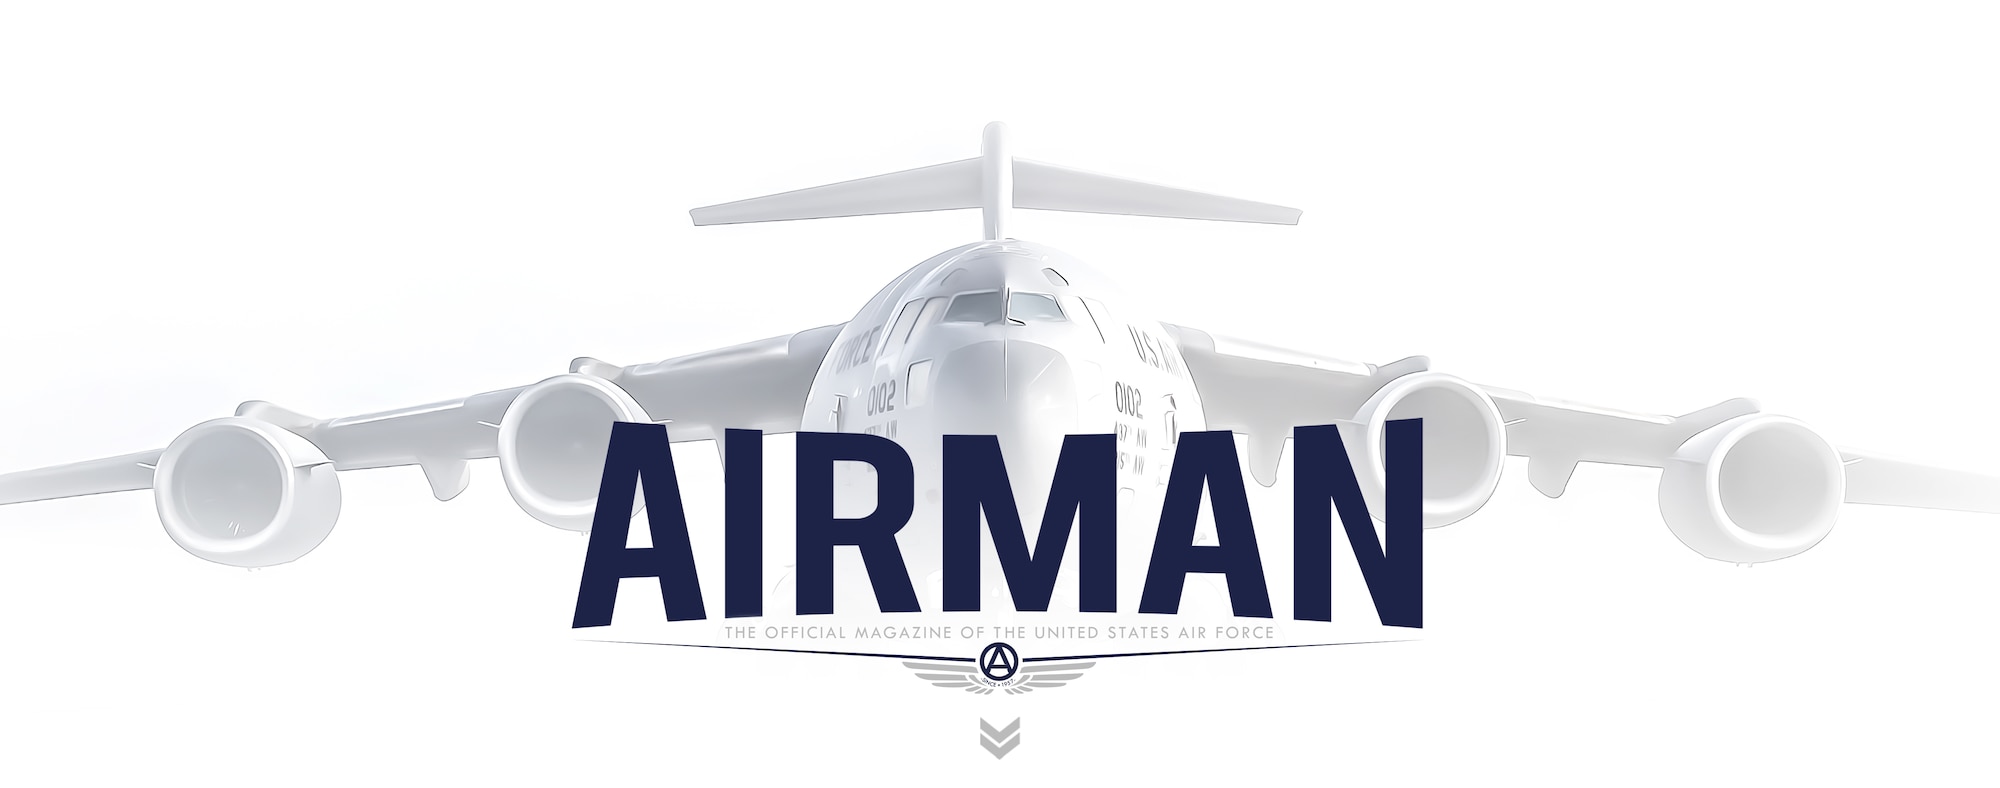 Airman Magazine: The official magazine of the United States Air Force